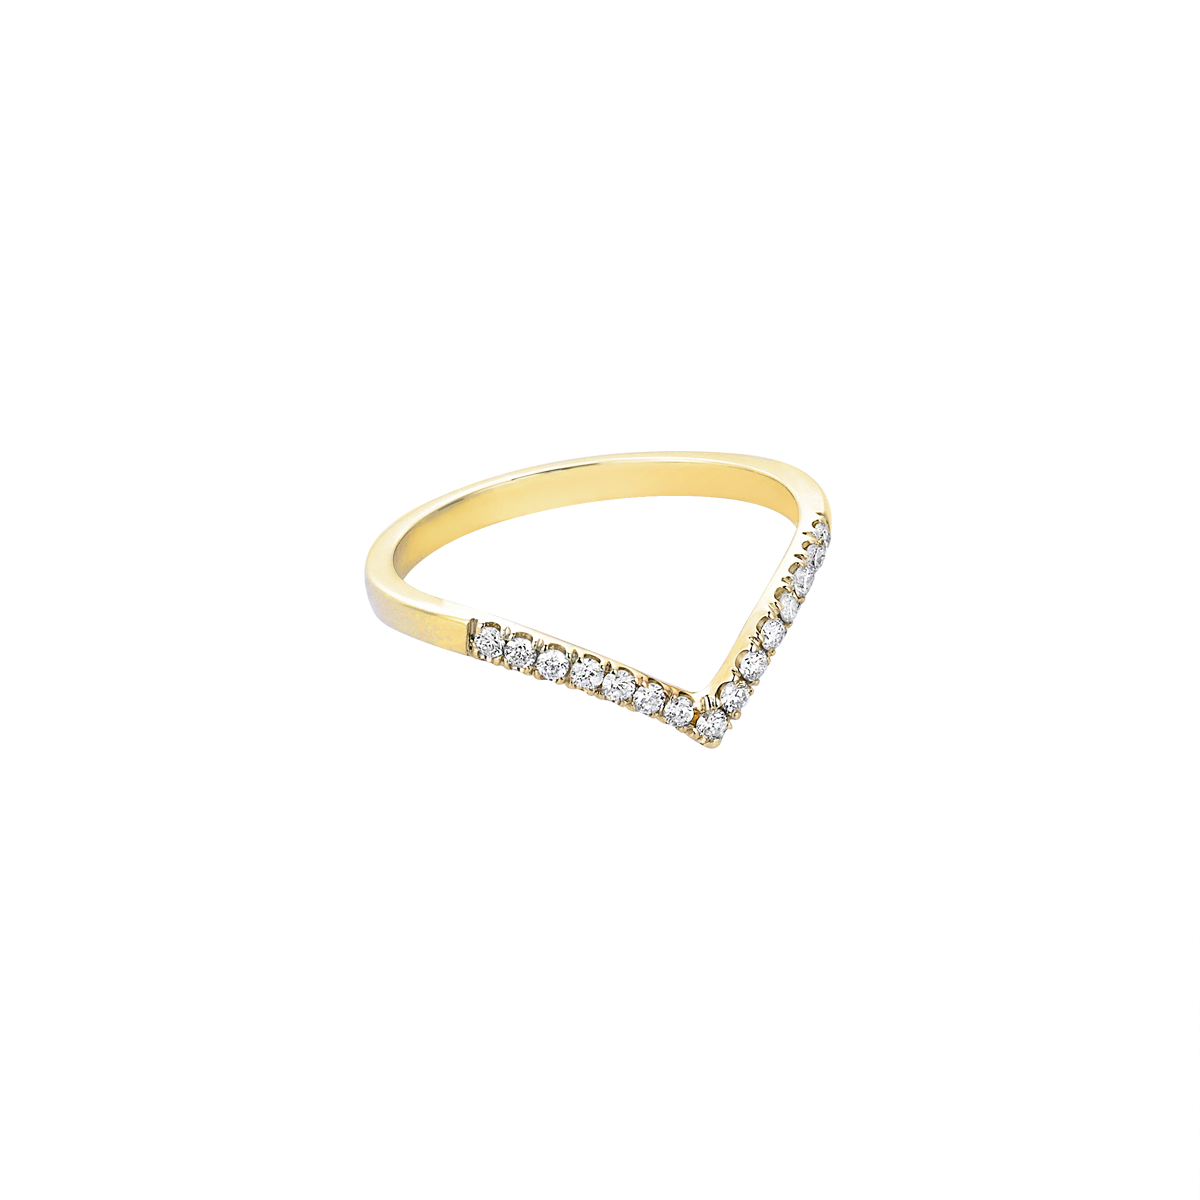 V Diamond Midi Ring in Yellow Gold - Her Story Shop